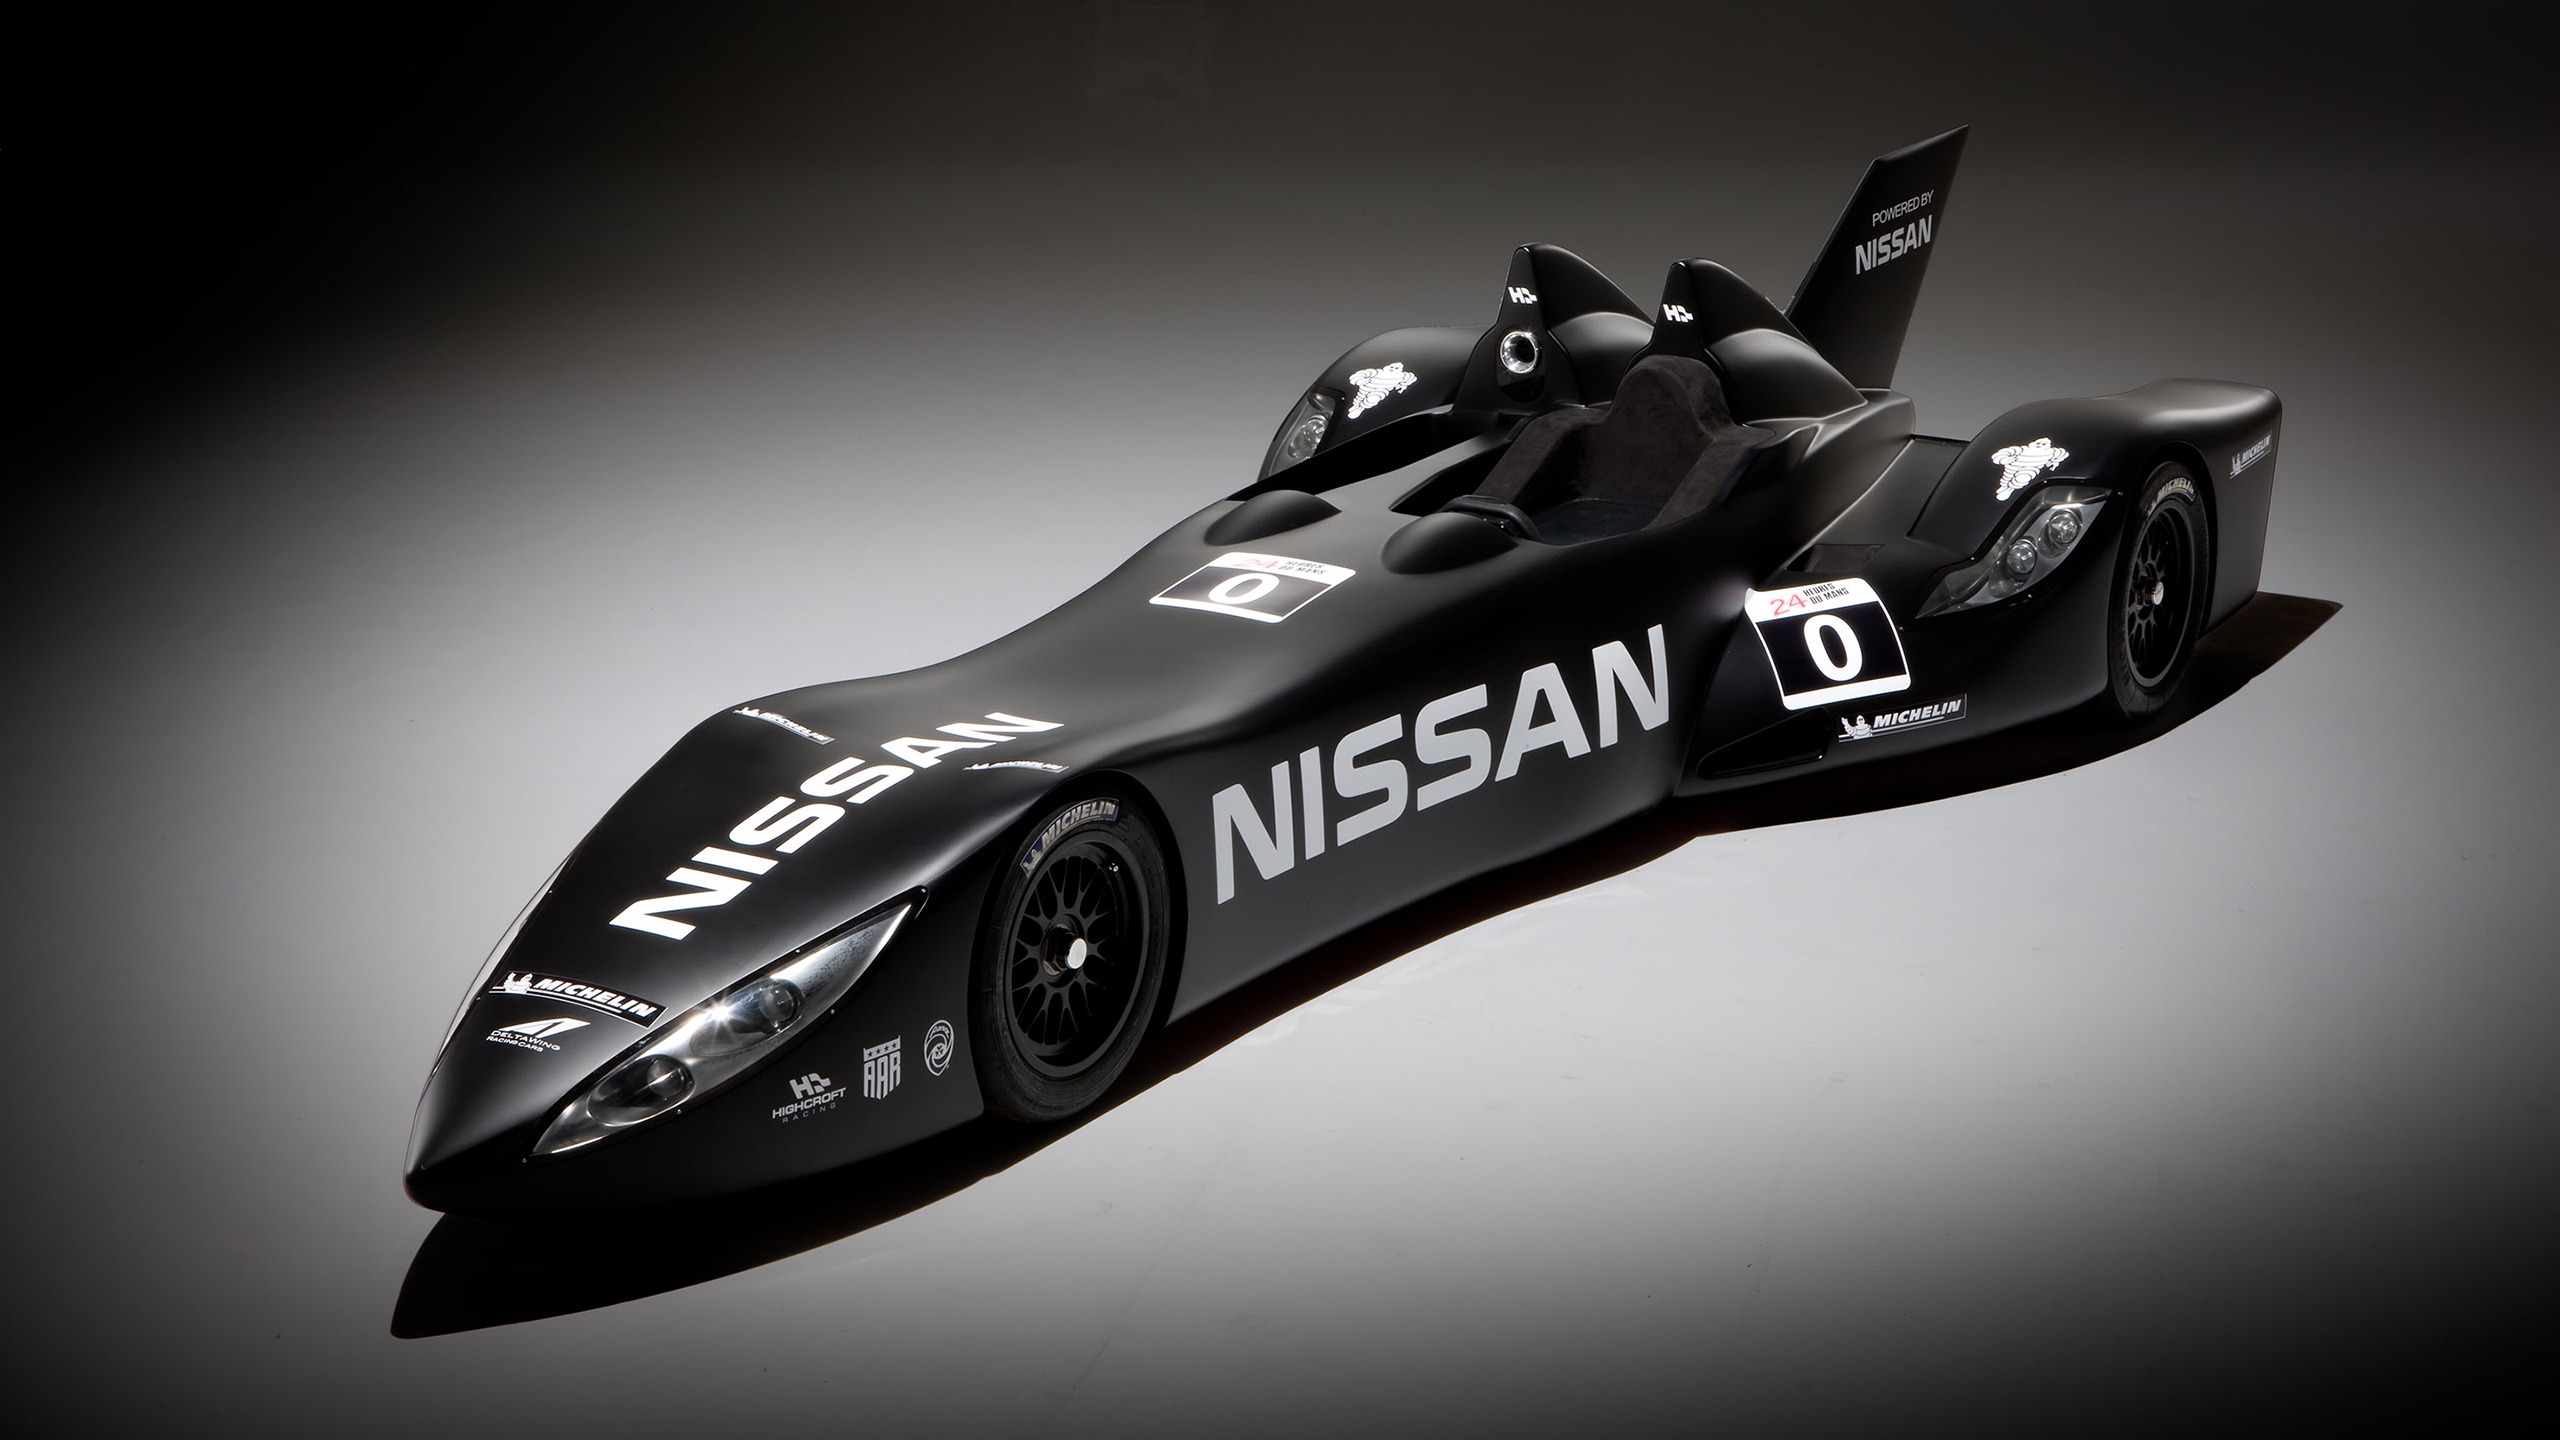 Nissan Deltawing Experimental Race Car for 2560x1440 HDTV resolution